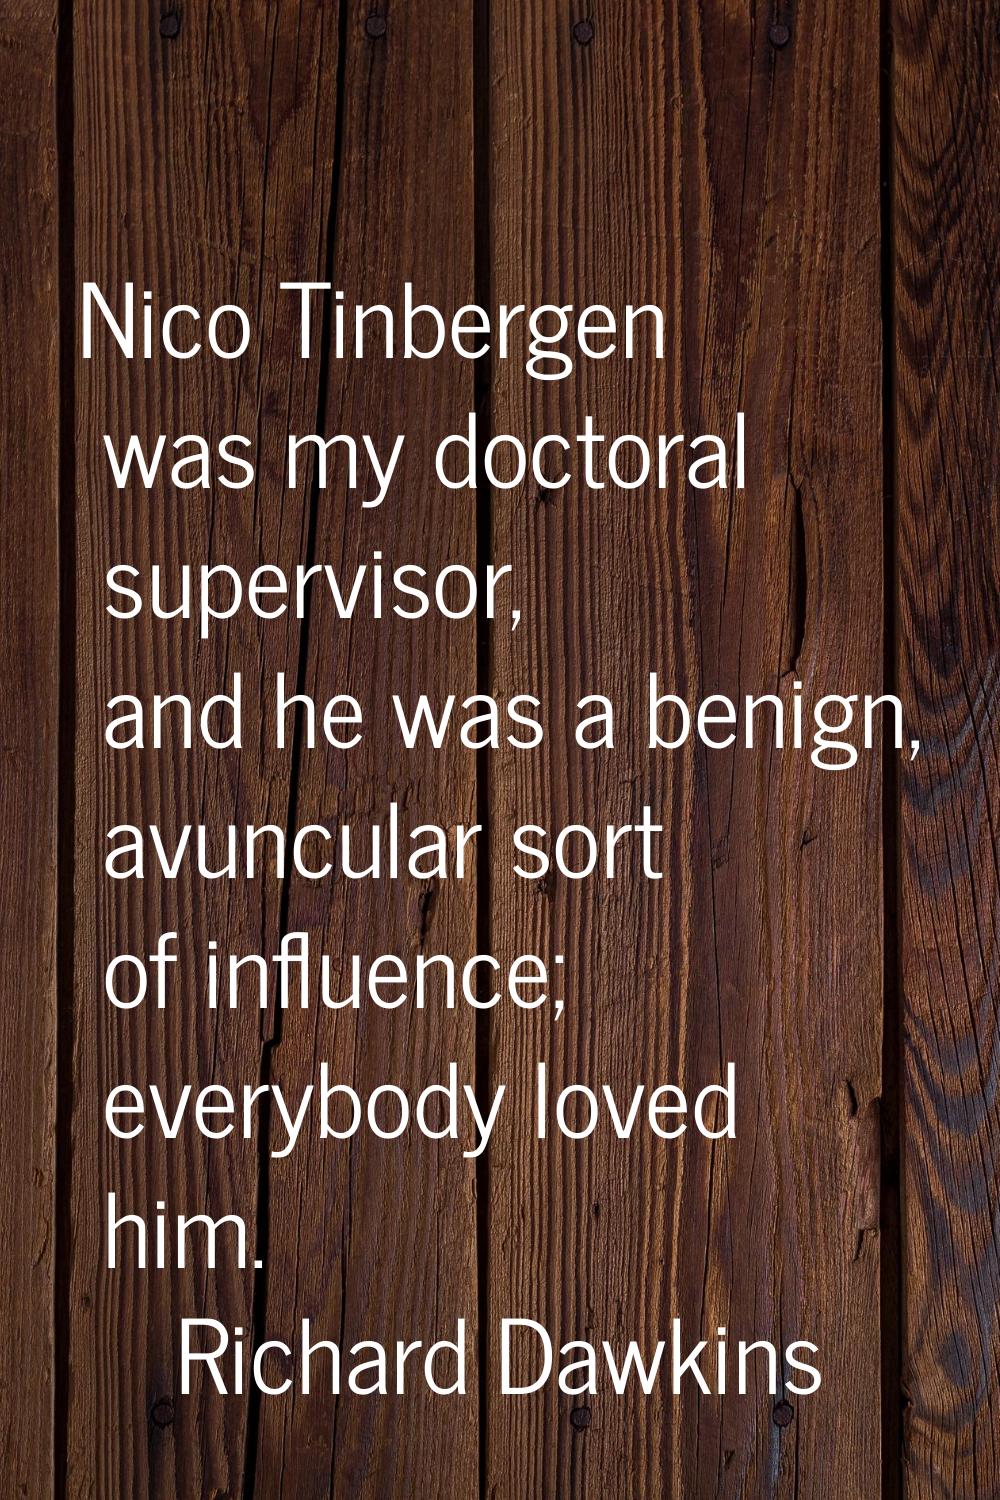 Nico Tinbergen was my doctoral supervisor, and he was a benign, avuncular sort of influence; everyb